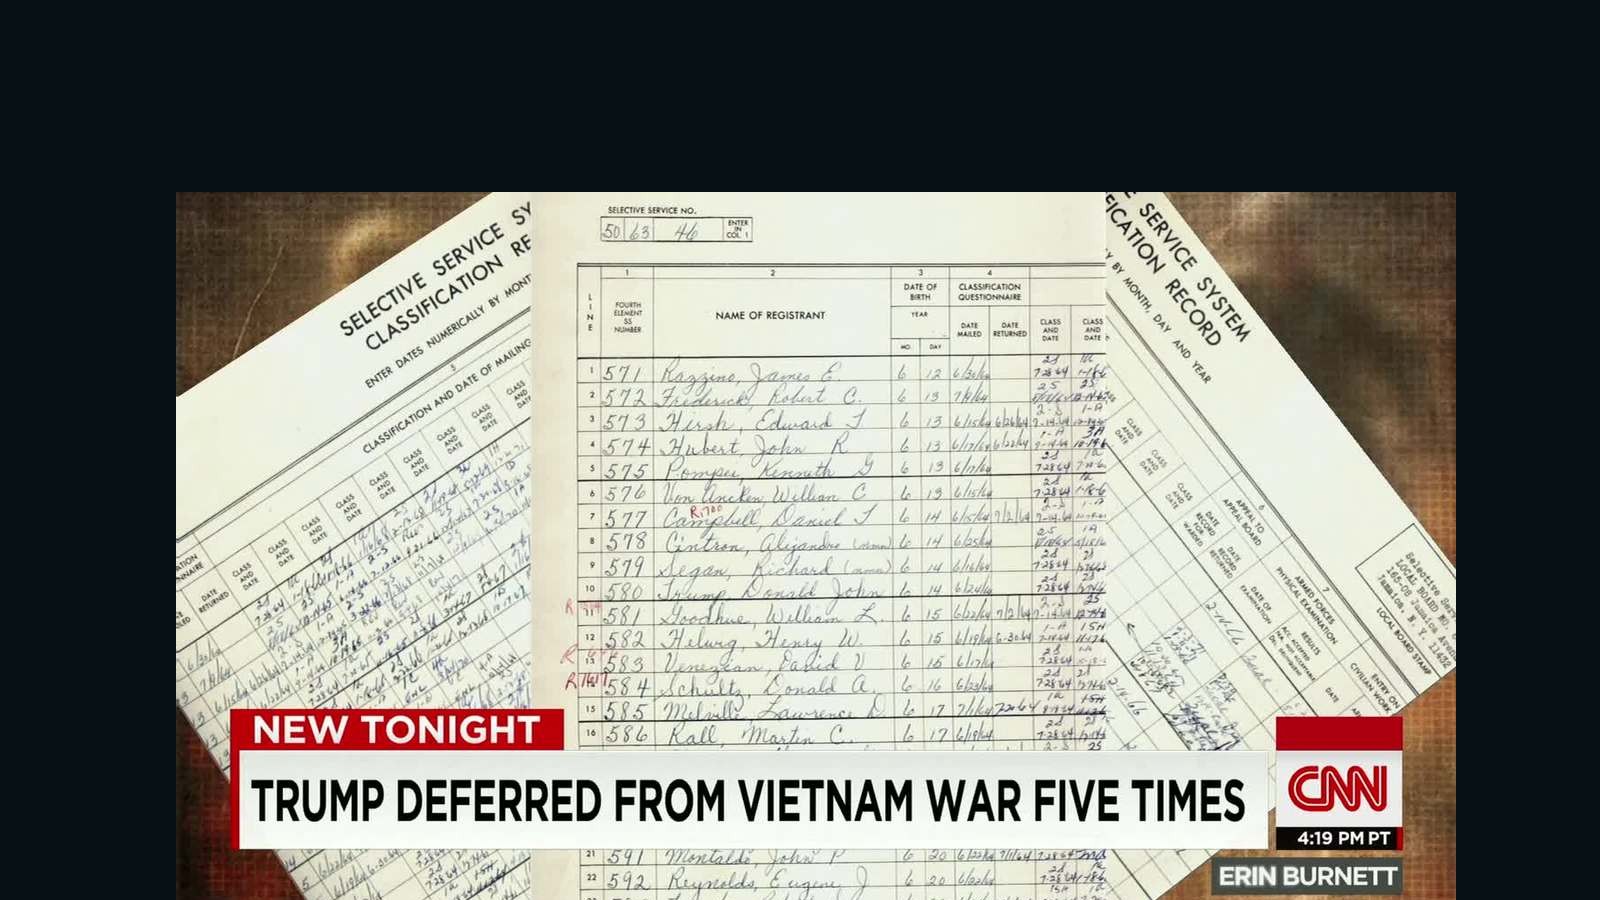 Why Was Trump Deferred From The Vietnam War Cnn Video 1687